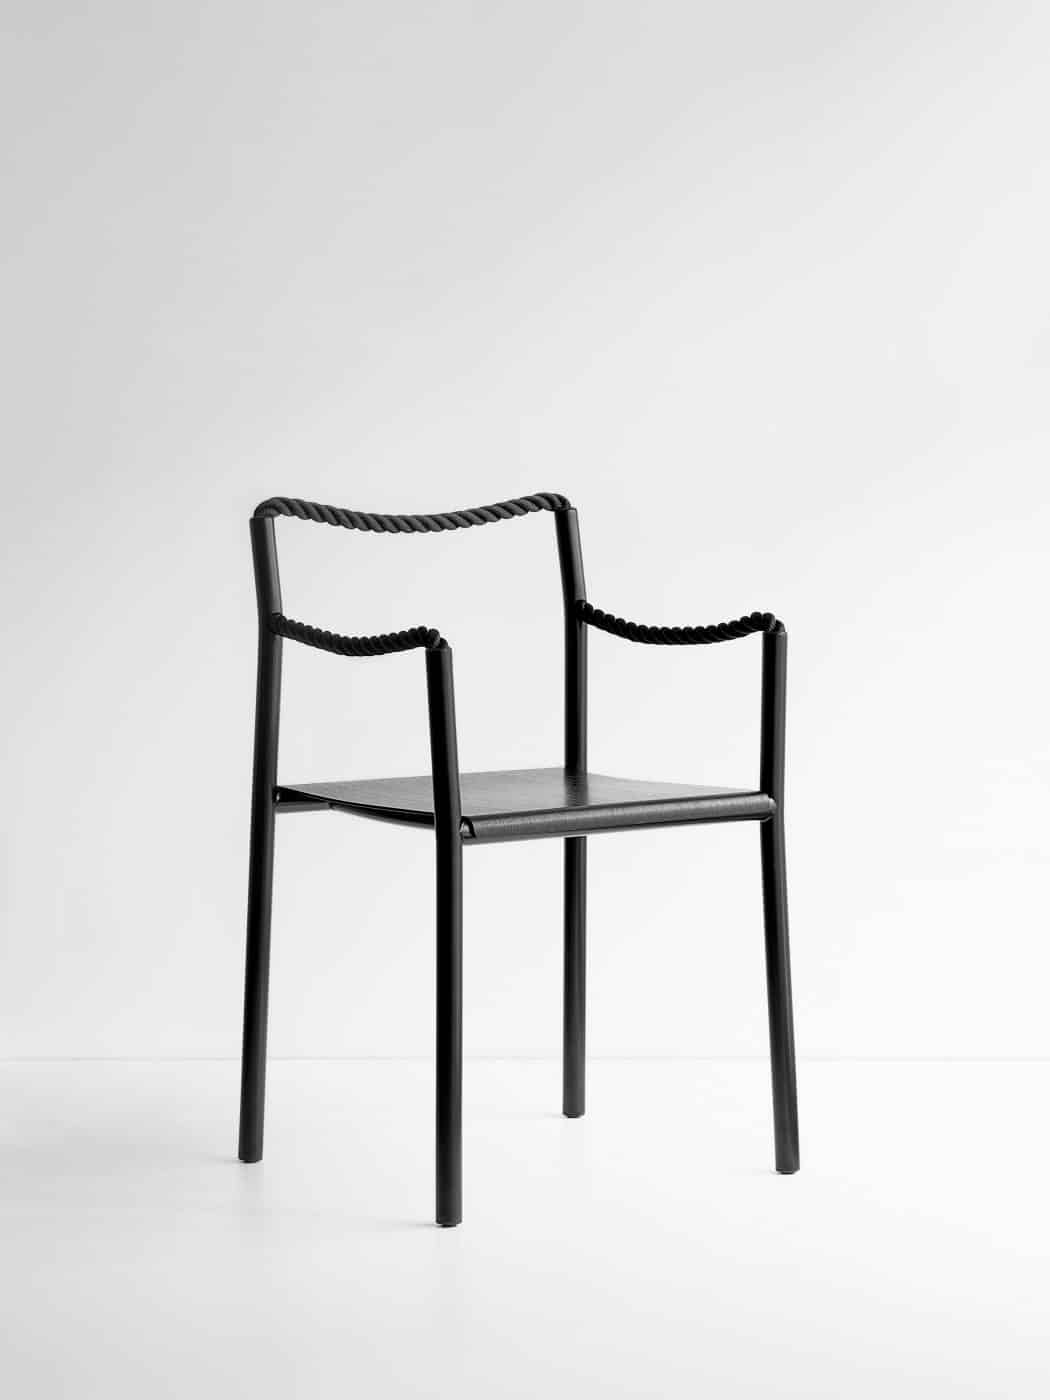 The Rope chair, created for Artek by the Bouroullec brothers